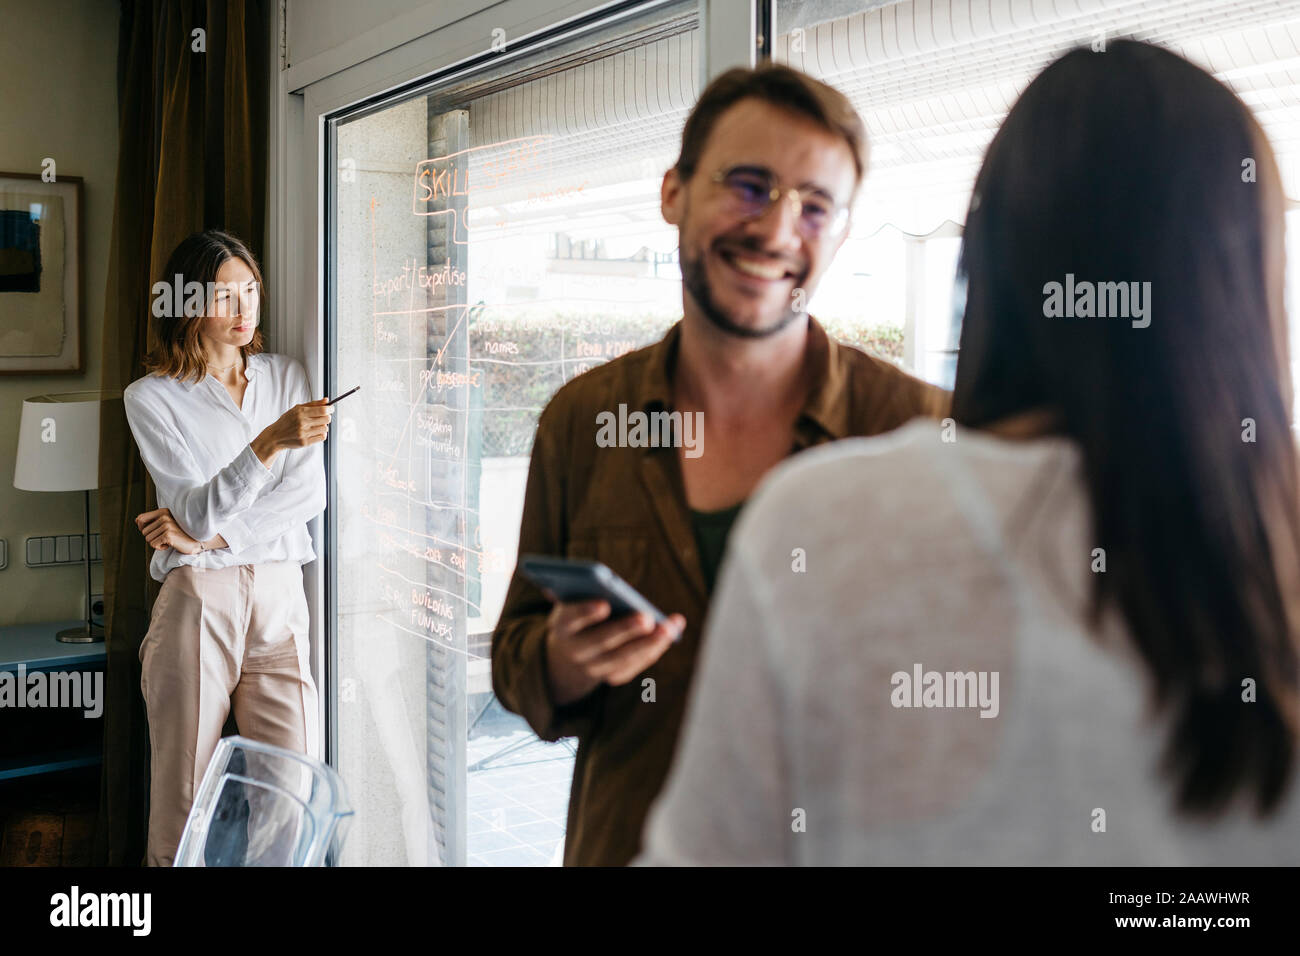 Woman writing on glass pane with coworkers in foreground Stock Photo